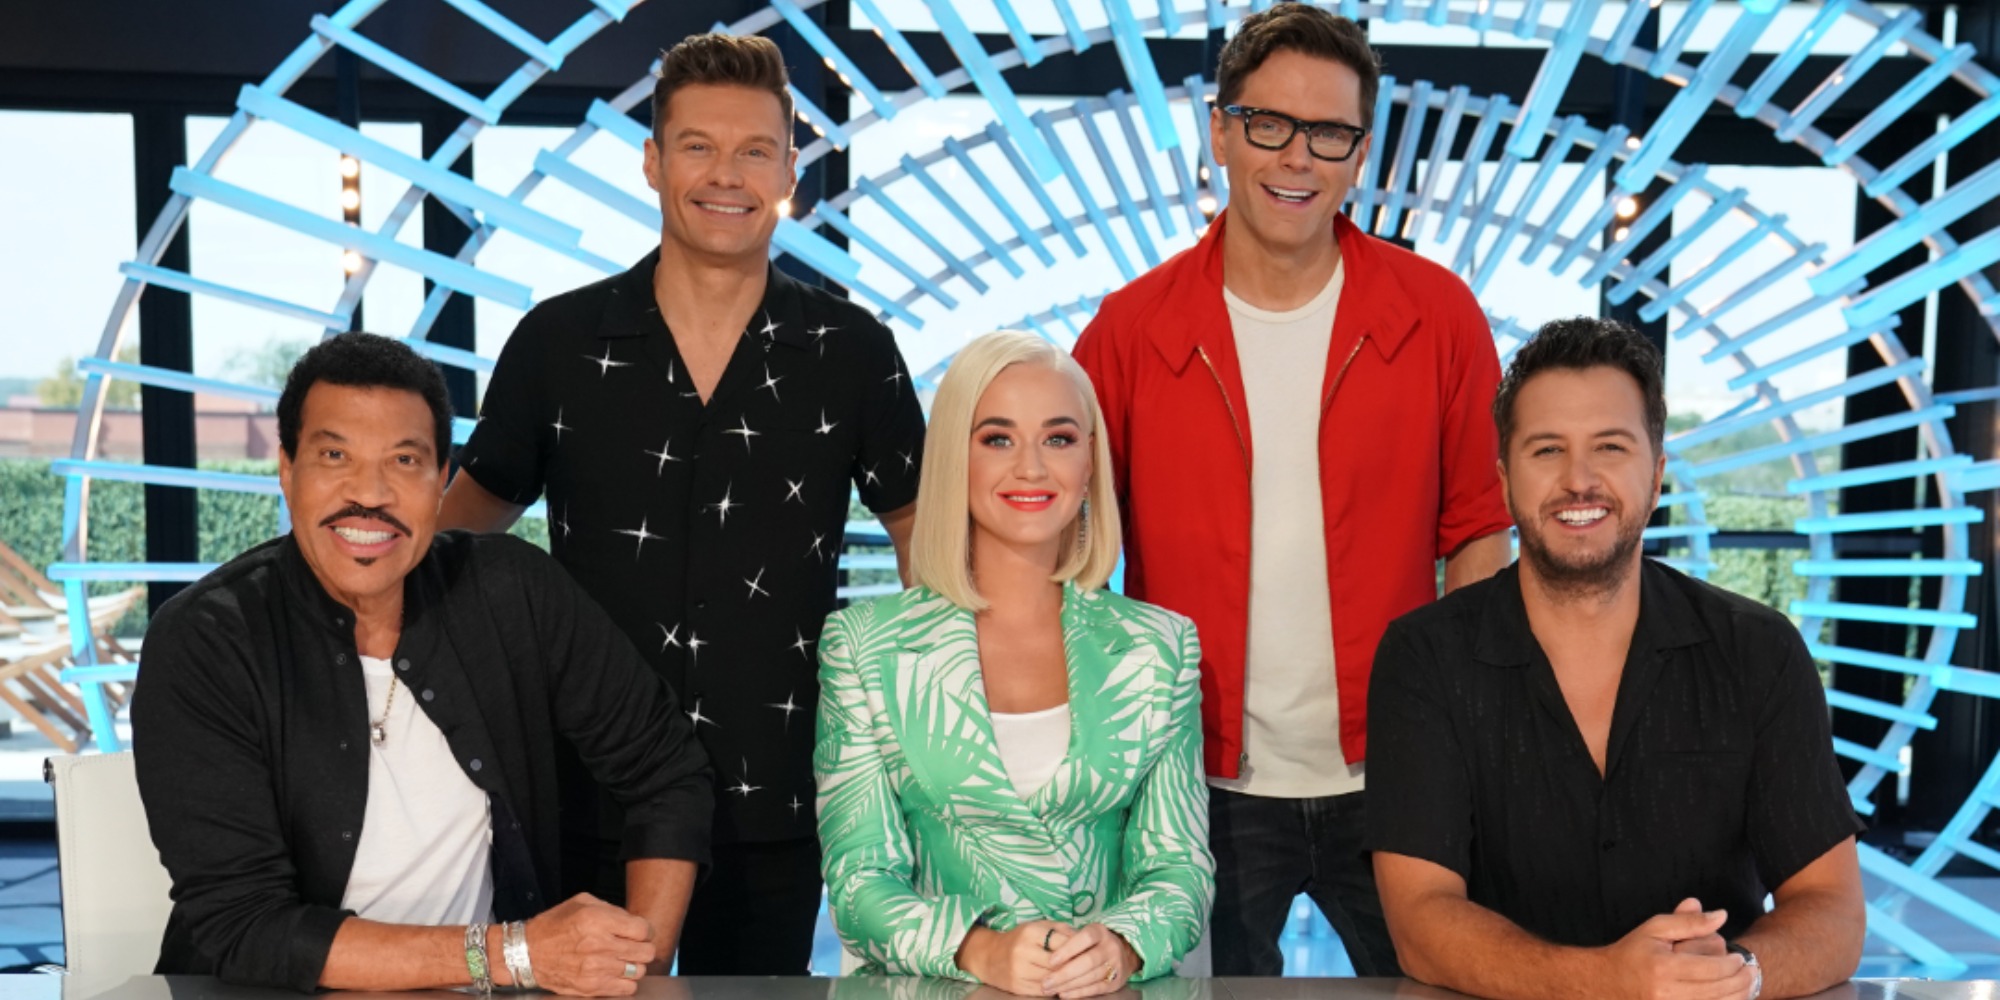 American Idol judges Lionel Richie, Katy Perry and Luke Bryan pose with Ryan Seacrest and mentor Bobby Bones in 2018.